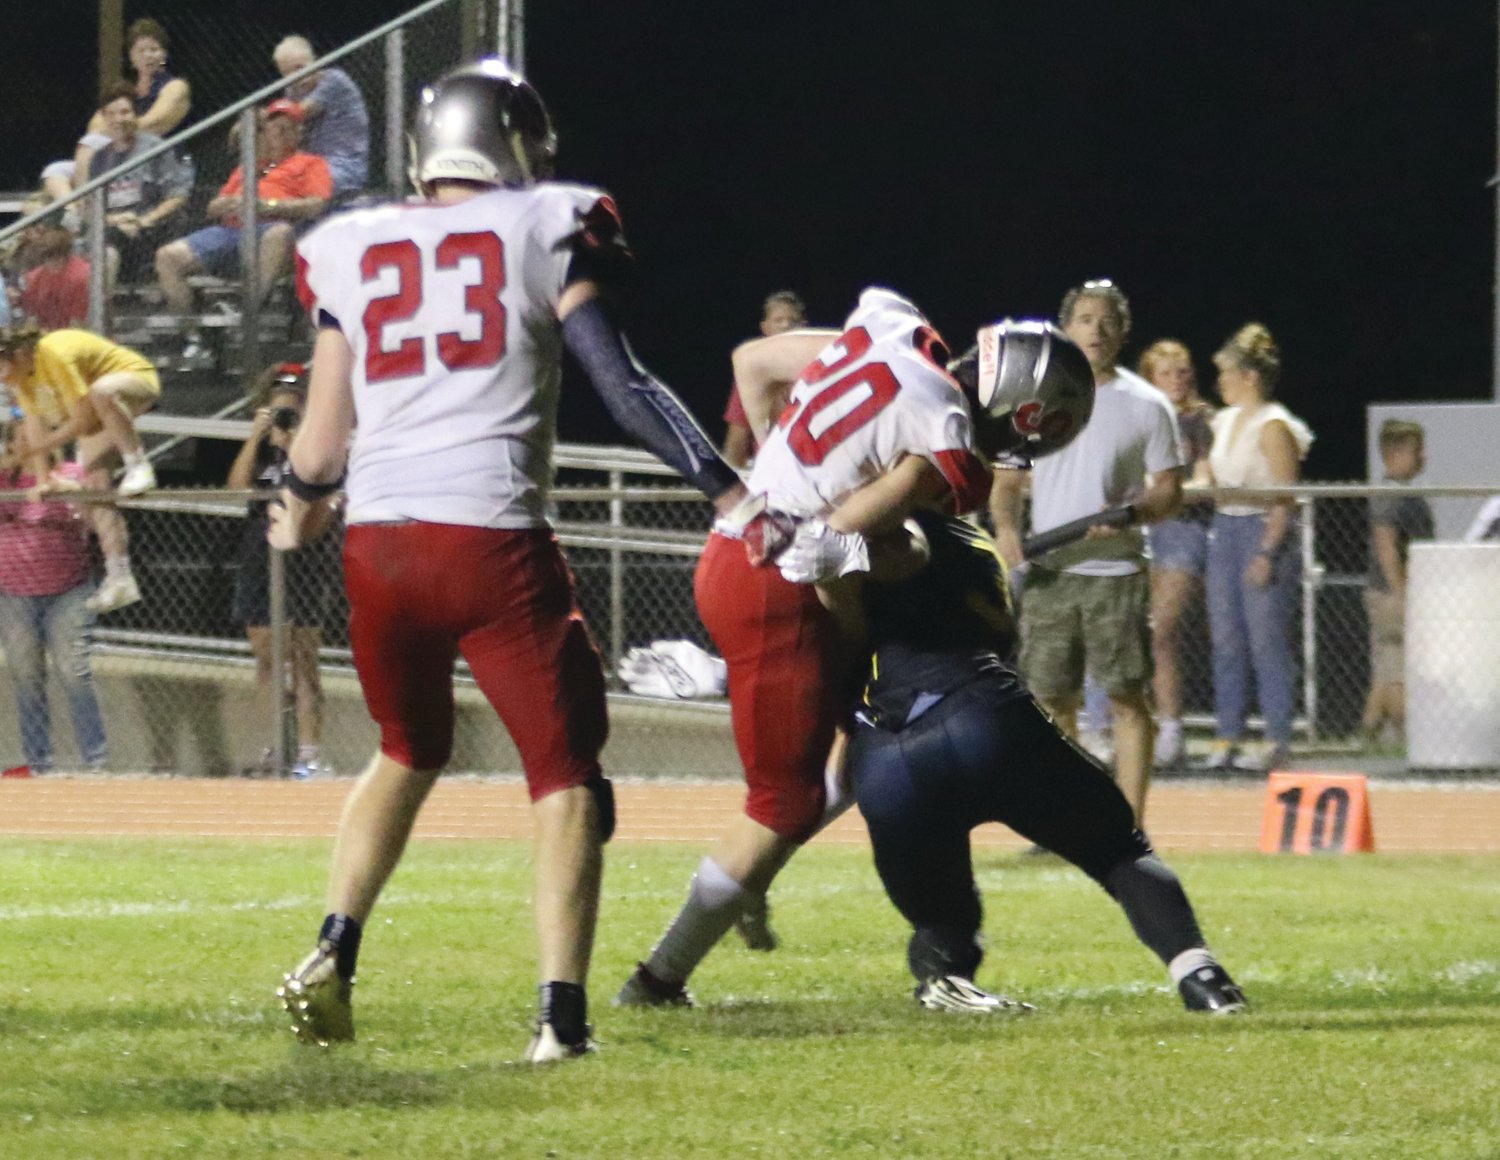 Southmont junior Kellan Kaelin scores a fourth quarter touchdown to put the icing on the cake of a 32-7 Mountie win at North Putnam on Friday night.